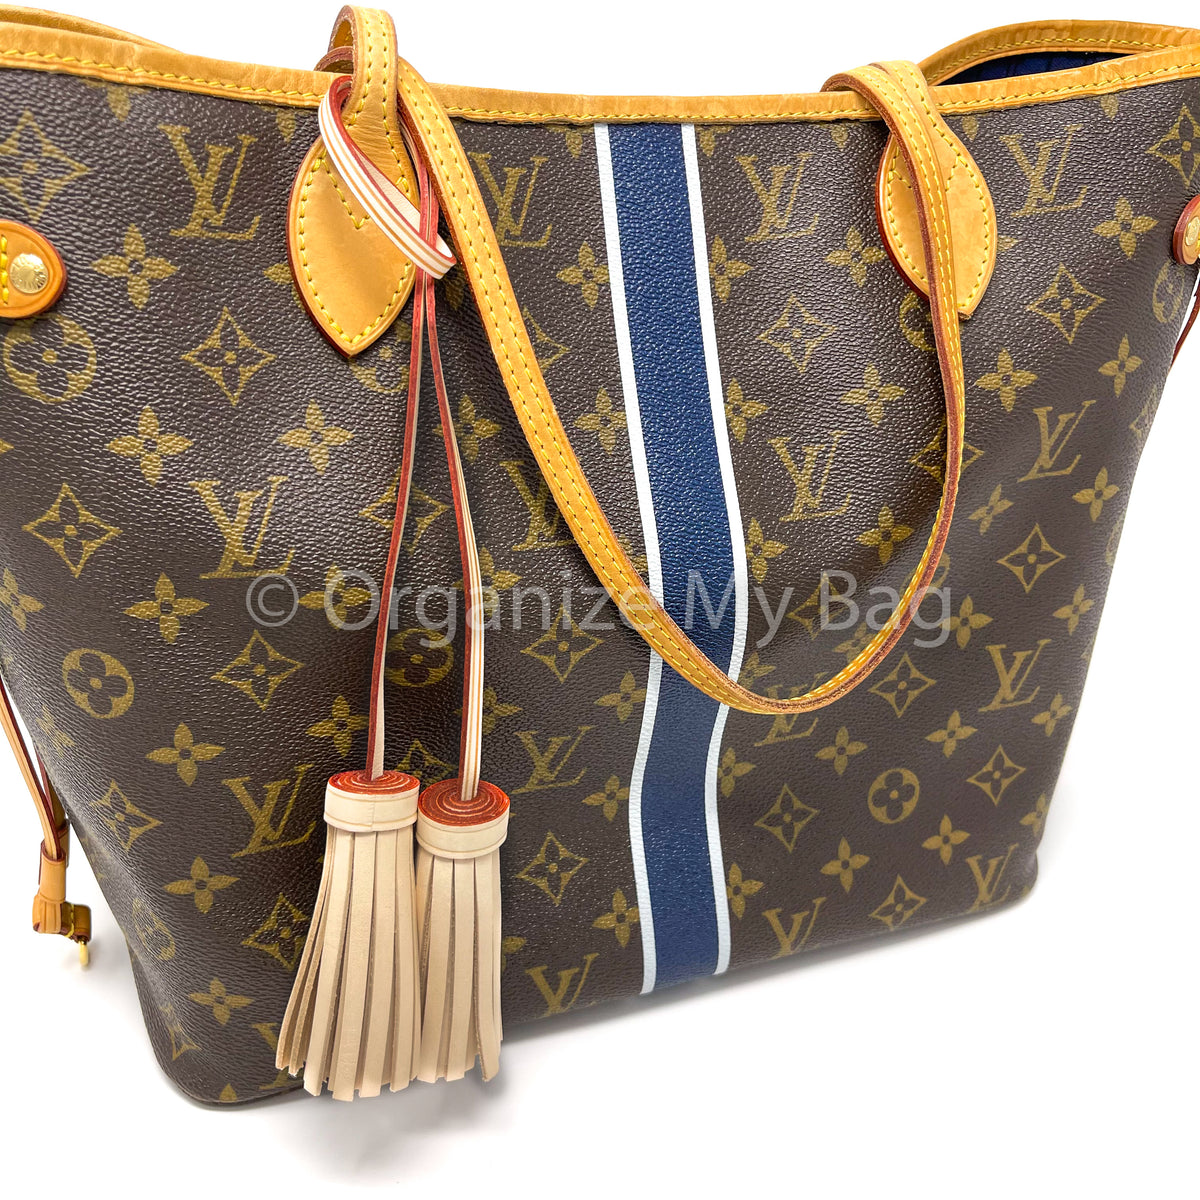 LOUIS VUITTON NEVERFULL GM 5 YEAR UPDATE (Pros and Cons) + WHATS